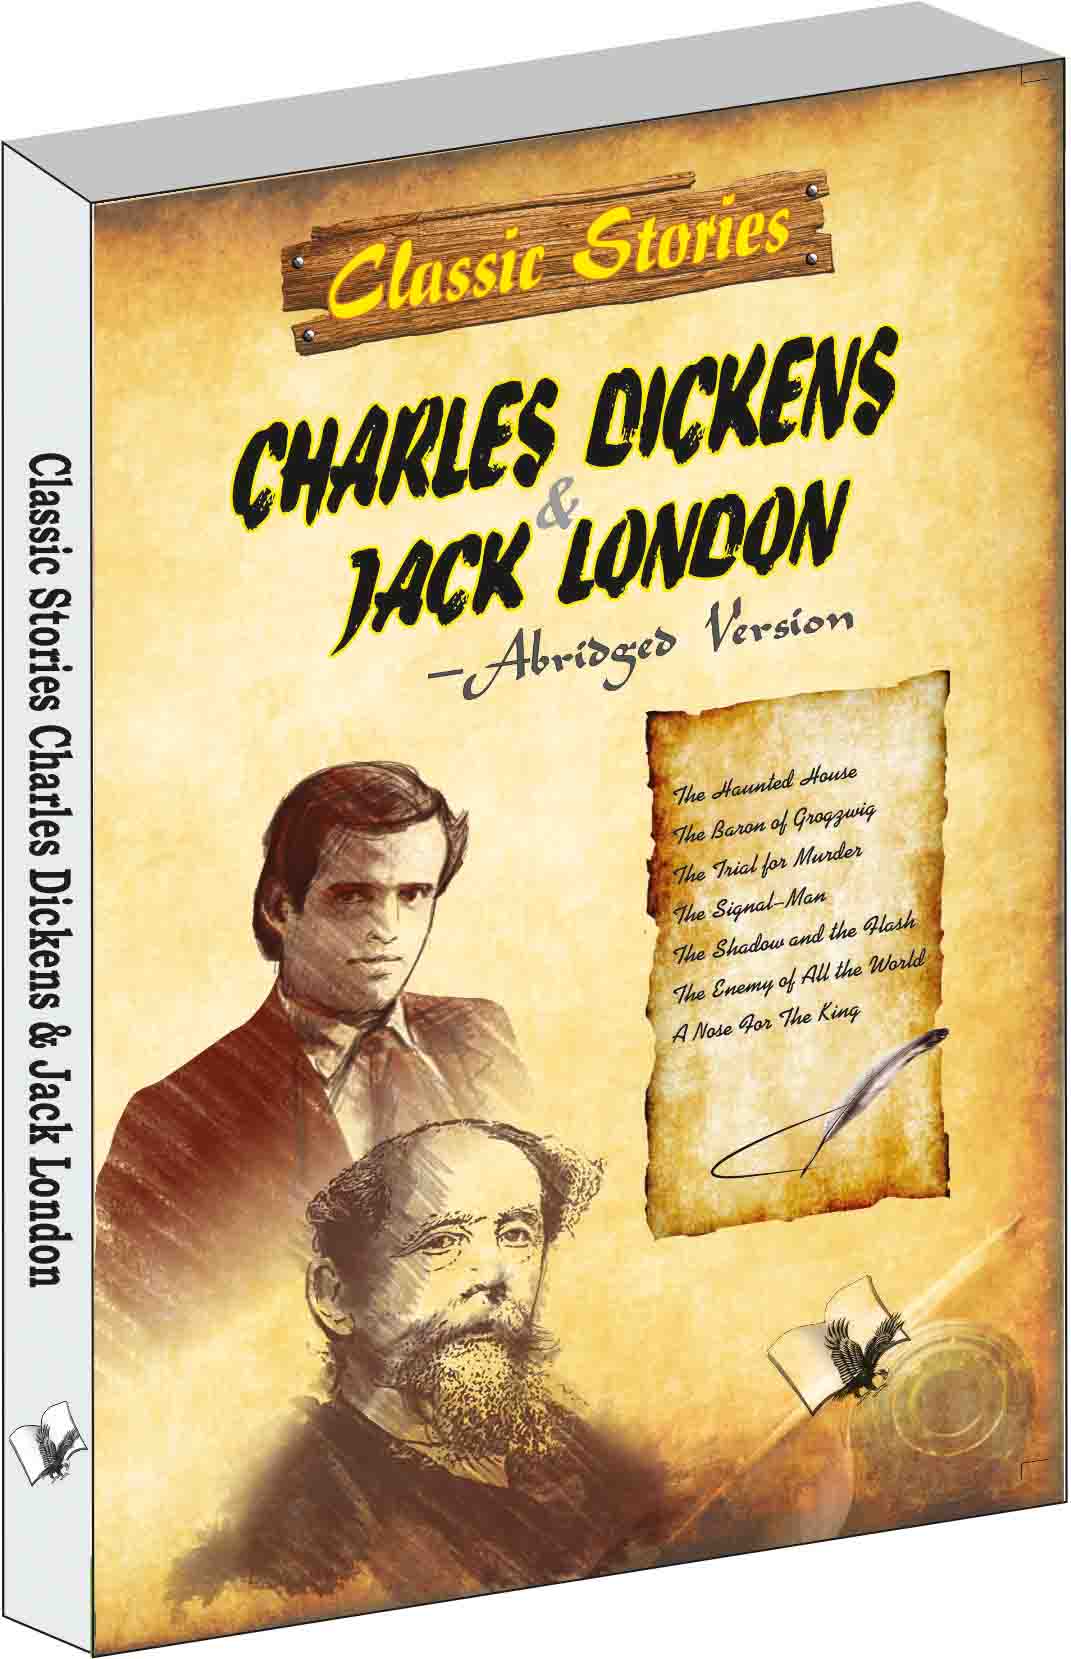 Classic Stories of Charles Dickens & Jack London-Unforgettable 7 exciting stories